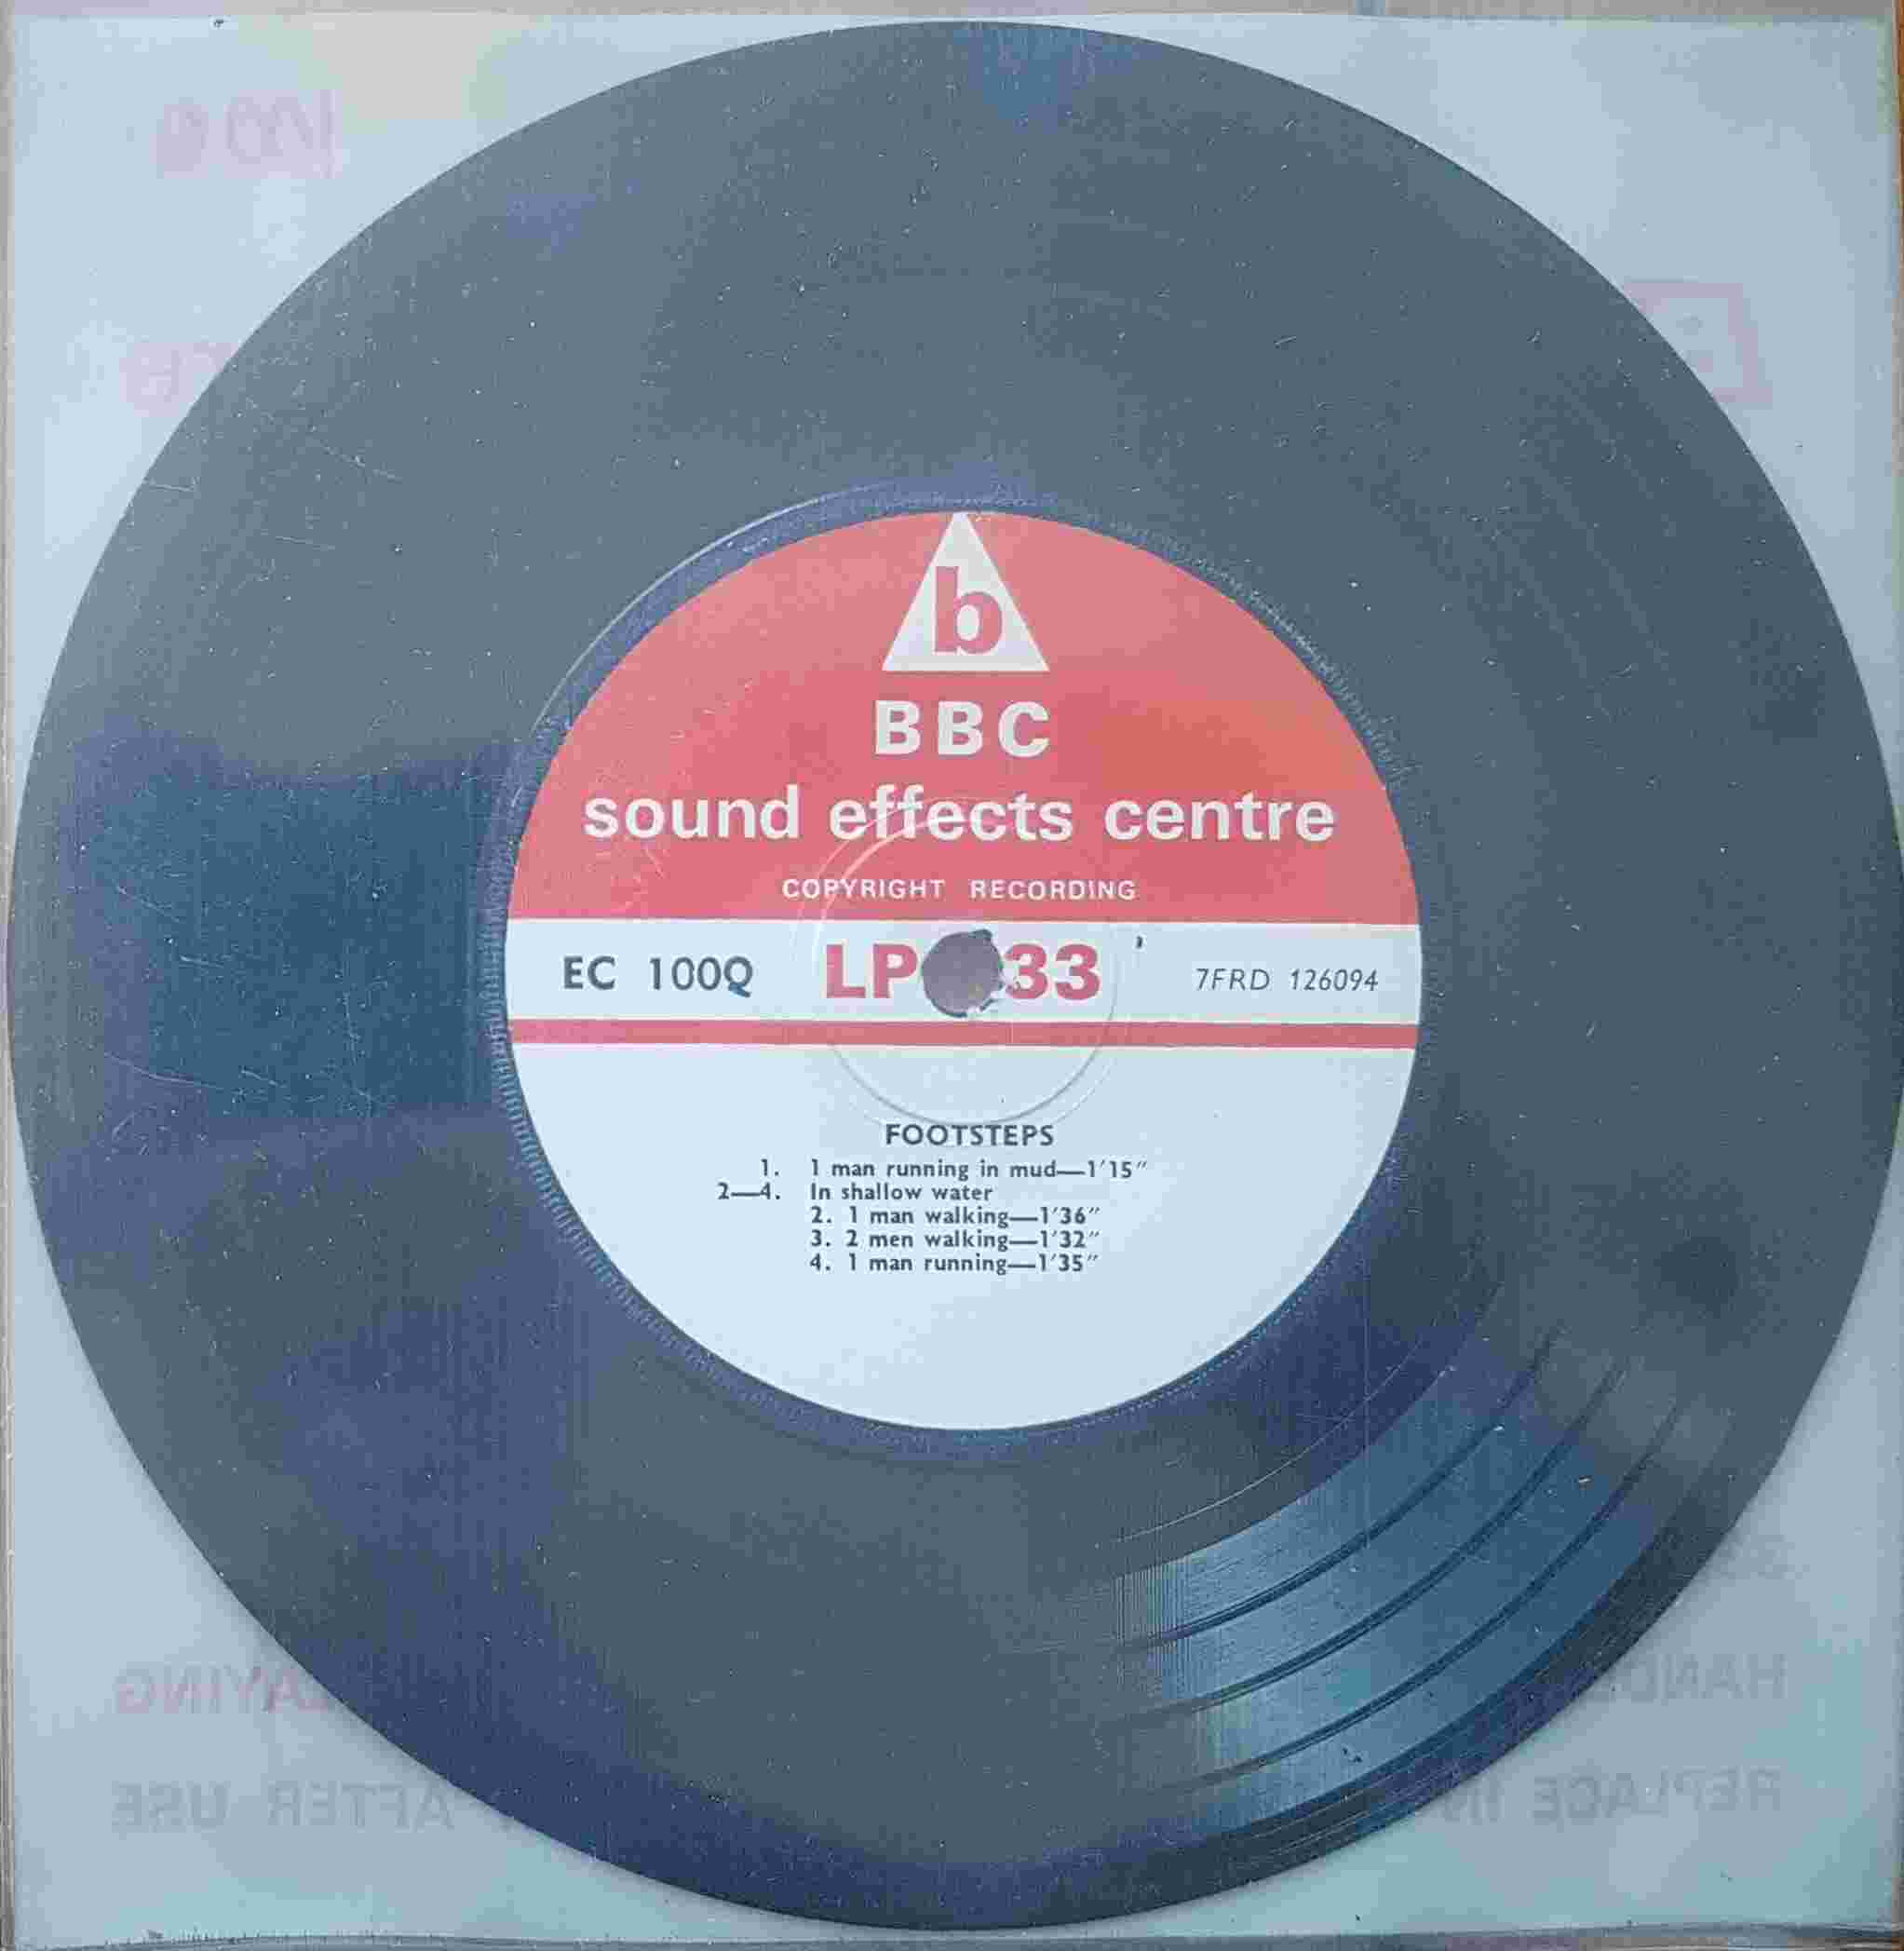 Picture of EC 100Q Footsteps by artist Not registered from the BBC records and Tapes library